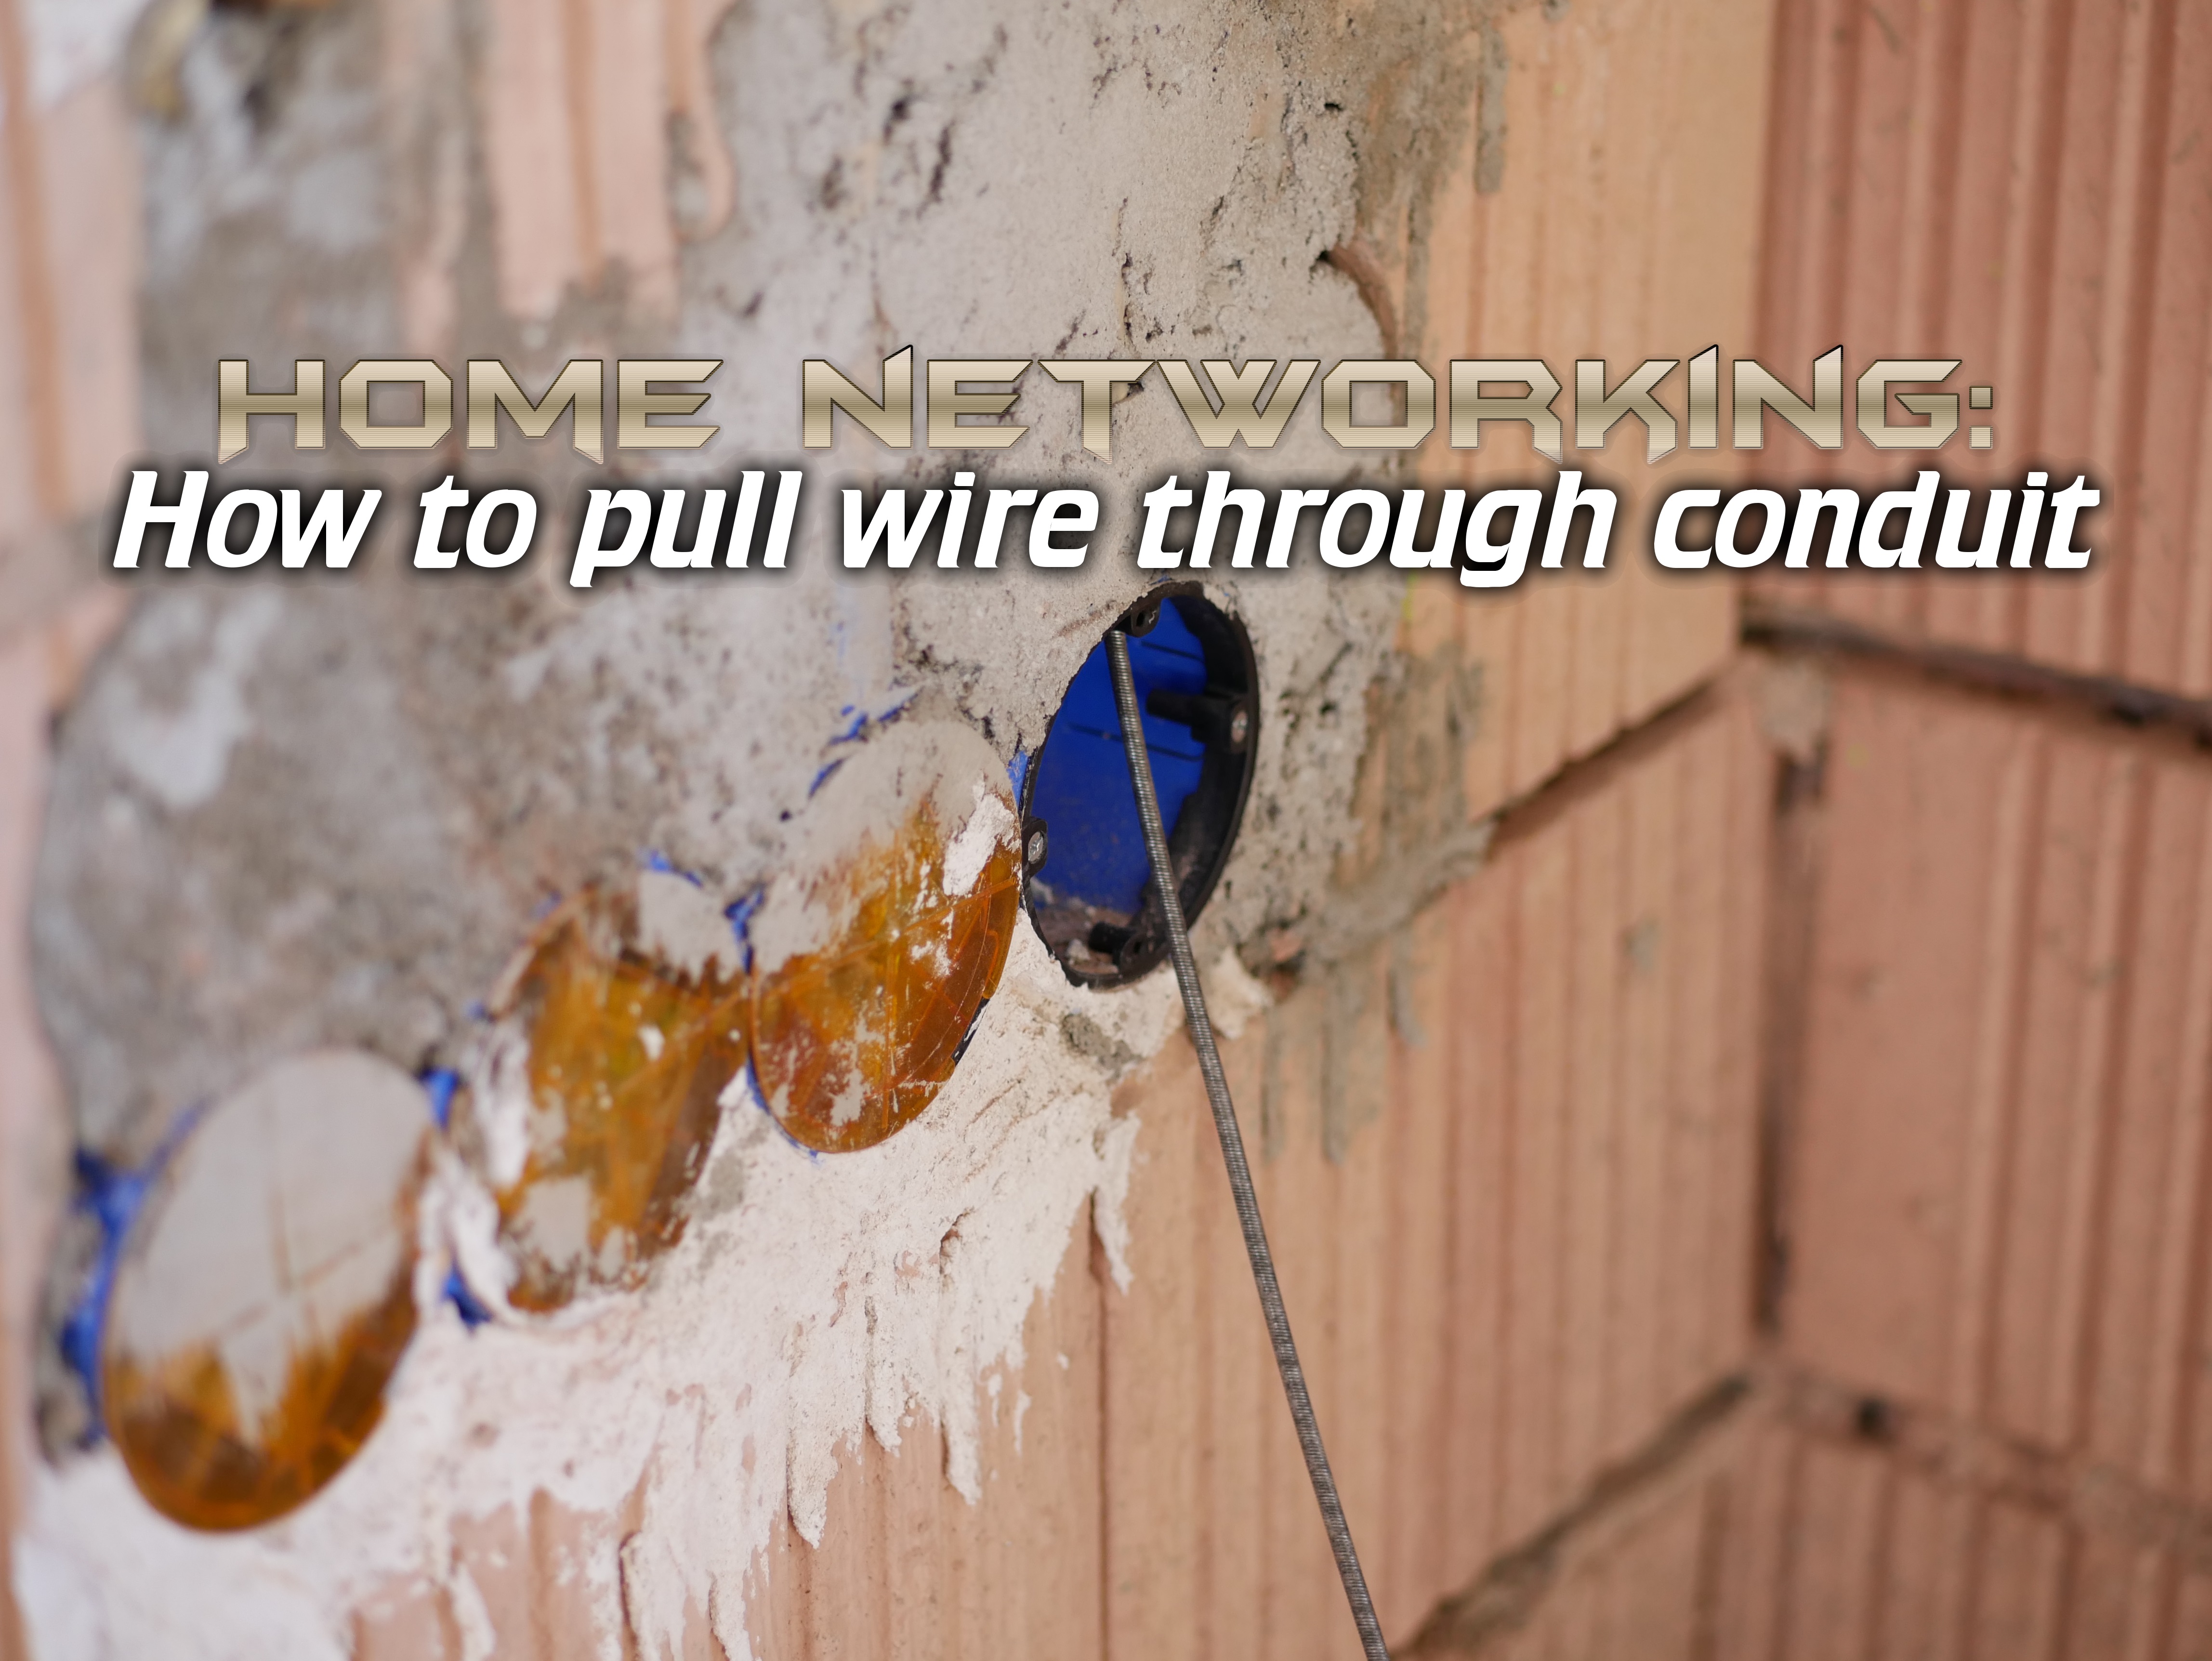 Pulling wires through walls